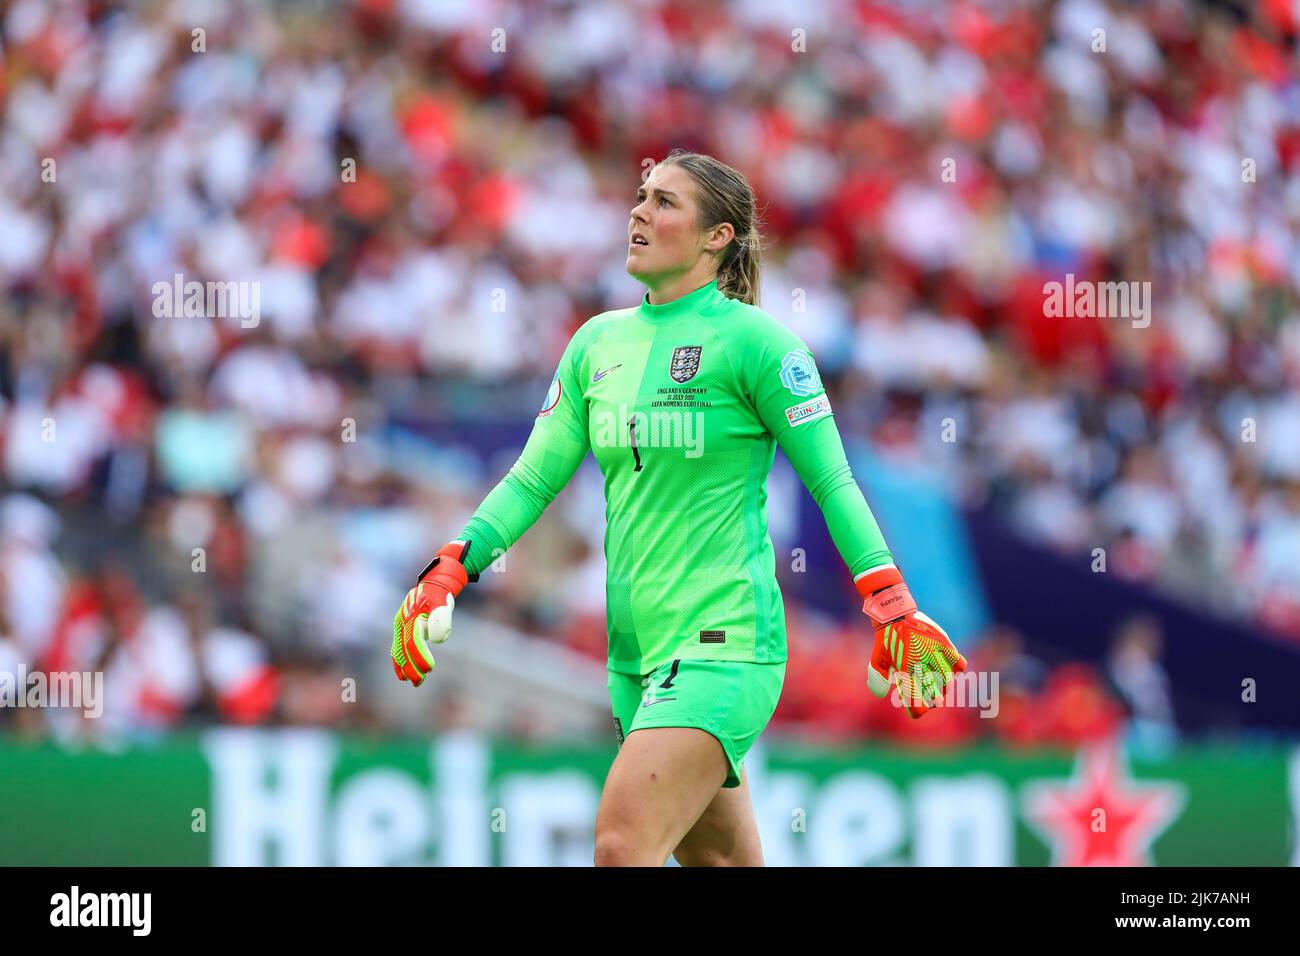 London, UK. 31st July, 2022. 31st July 2022; Wembley Stadium, London, England: Womens European International final, England versus Germany: goalkeeper Mary Earps of England during a stoppage in play for a German player to receive treatment for injury. Credit: Action Plus Sports Images/Alamy Live News Credit: Action Plus Sports Images/Alamy Live News Stock Photo